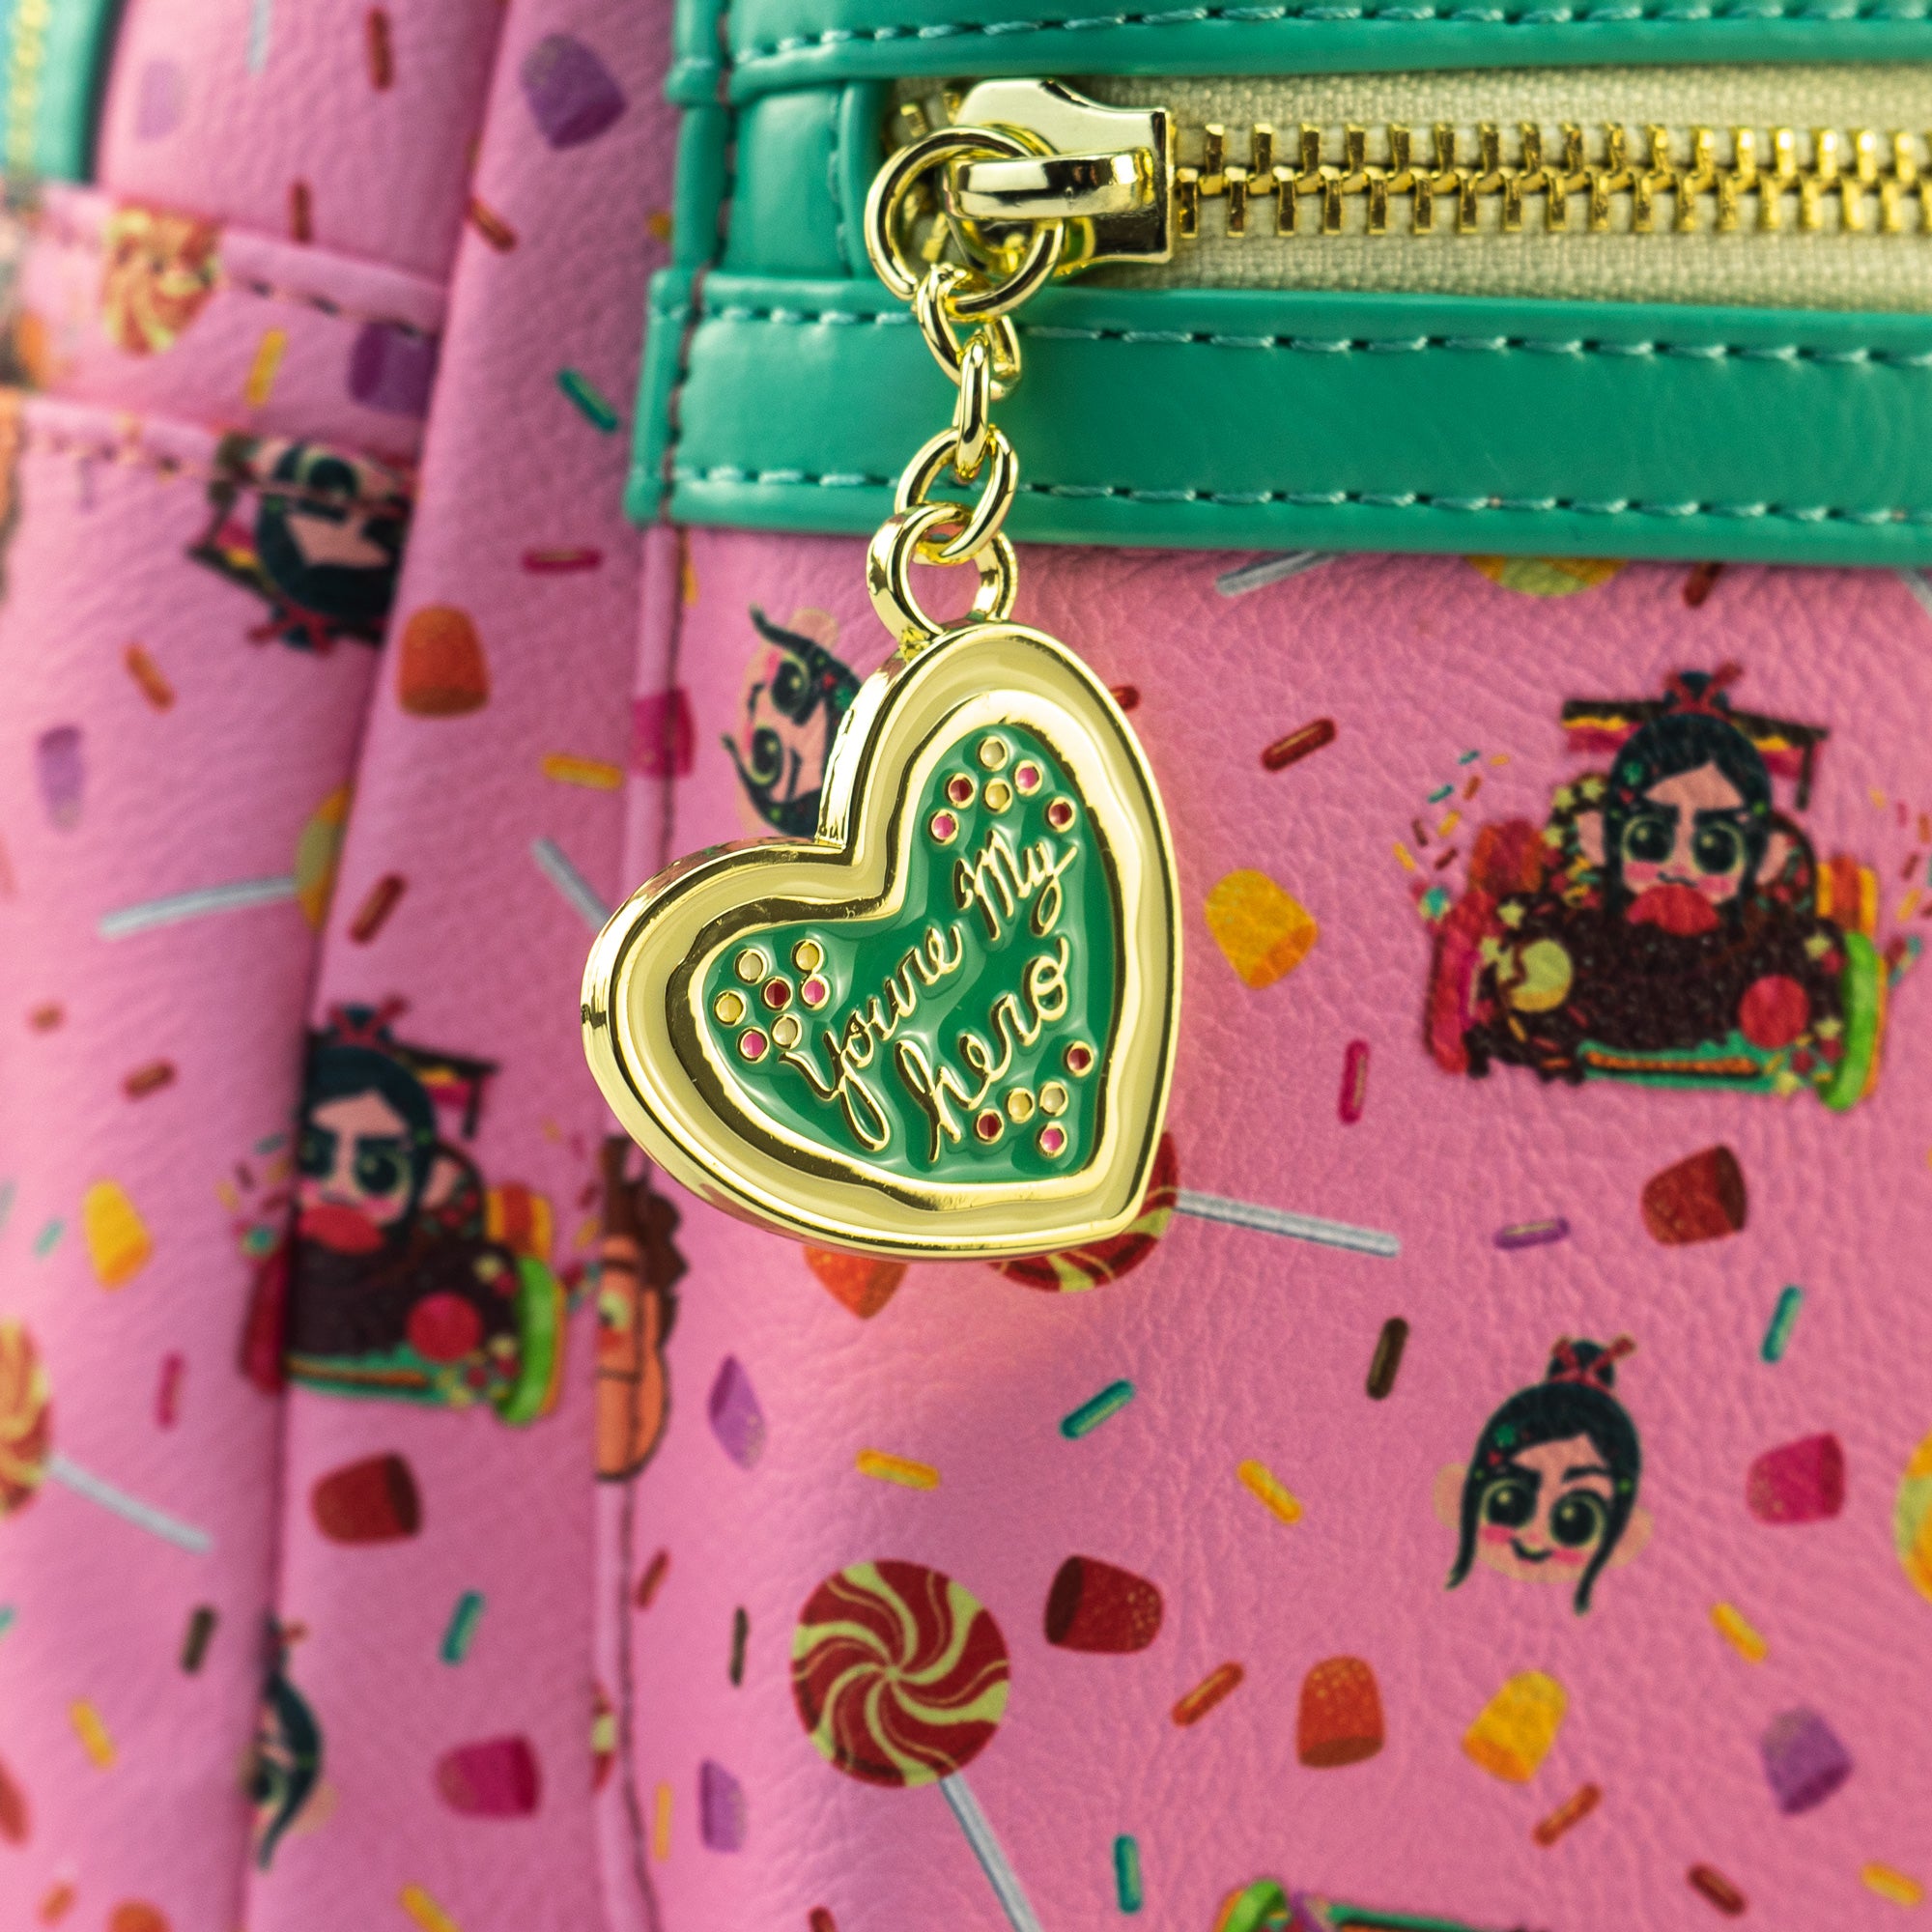 Loungefly x Disney Wreck It Ralph Vanellope AOP Mini Backpack